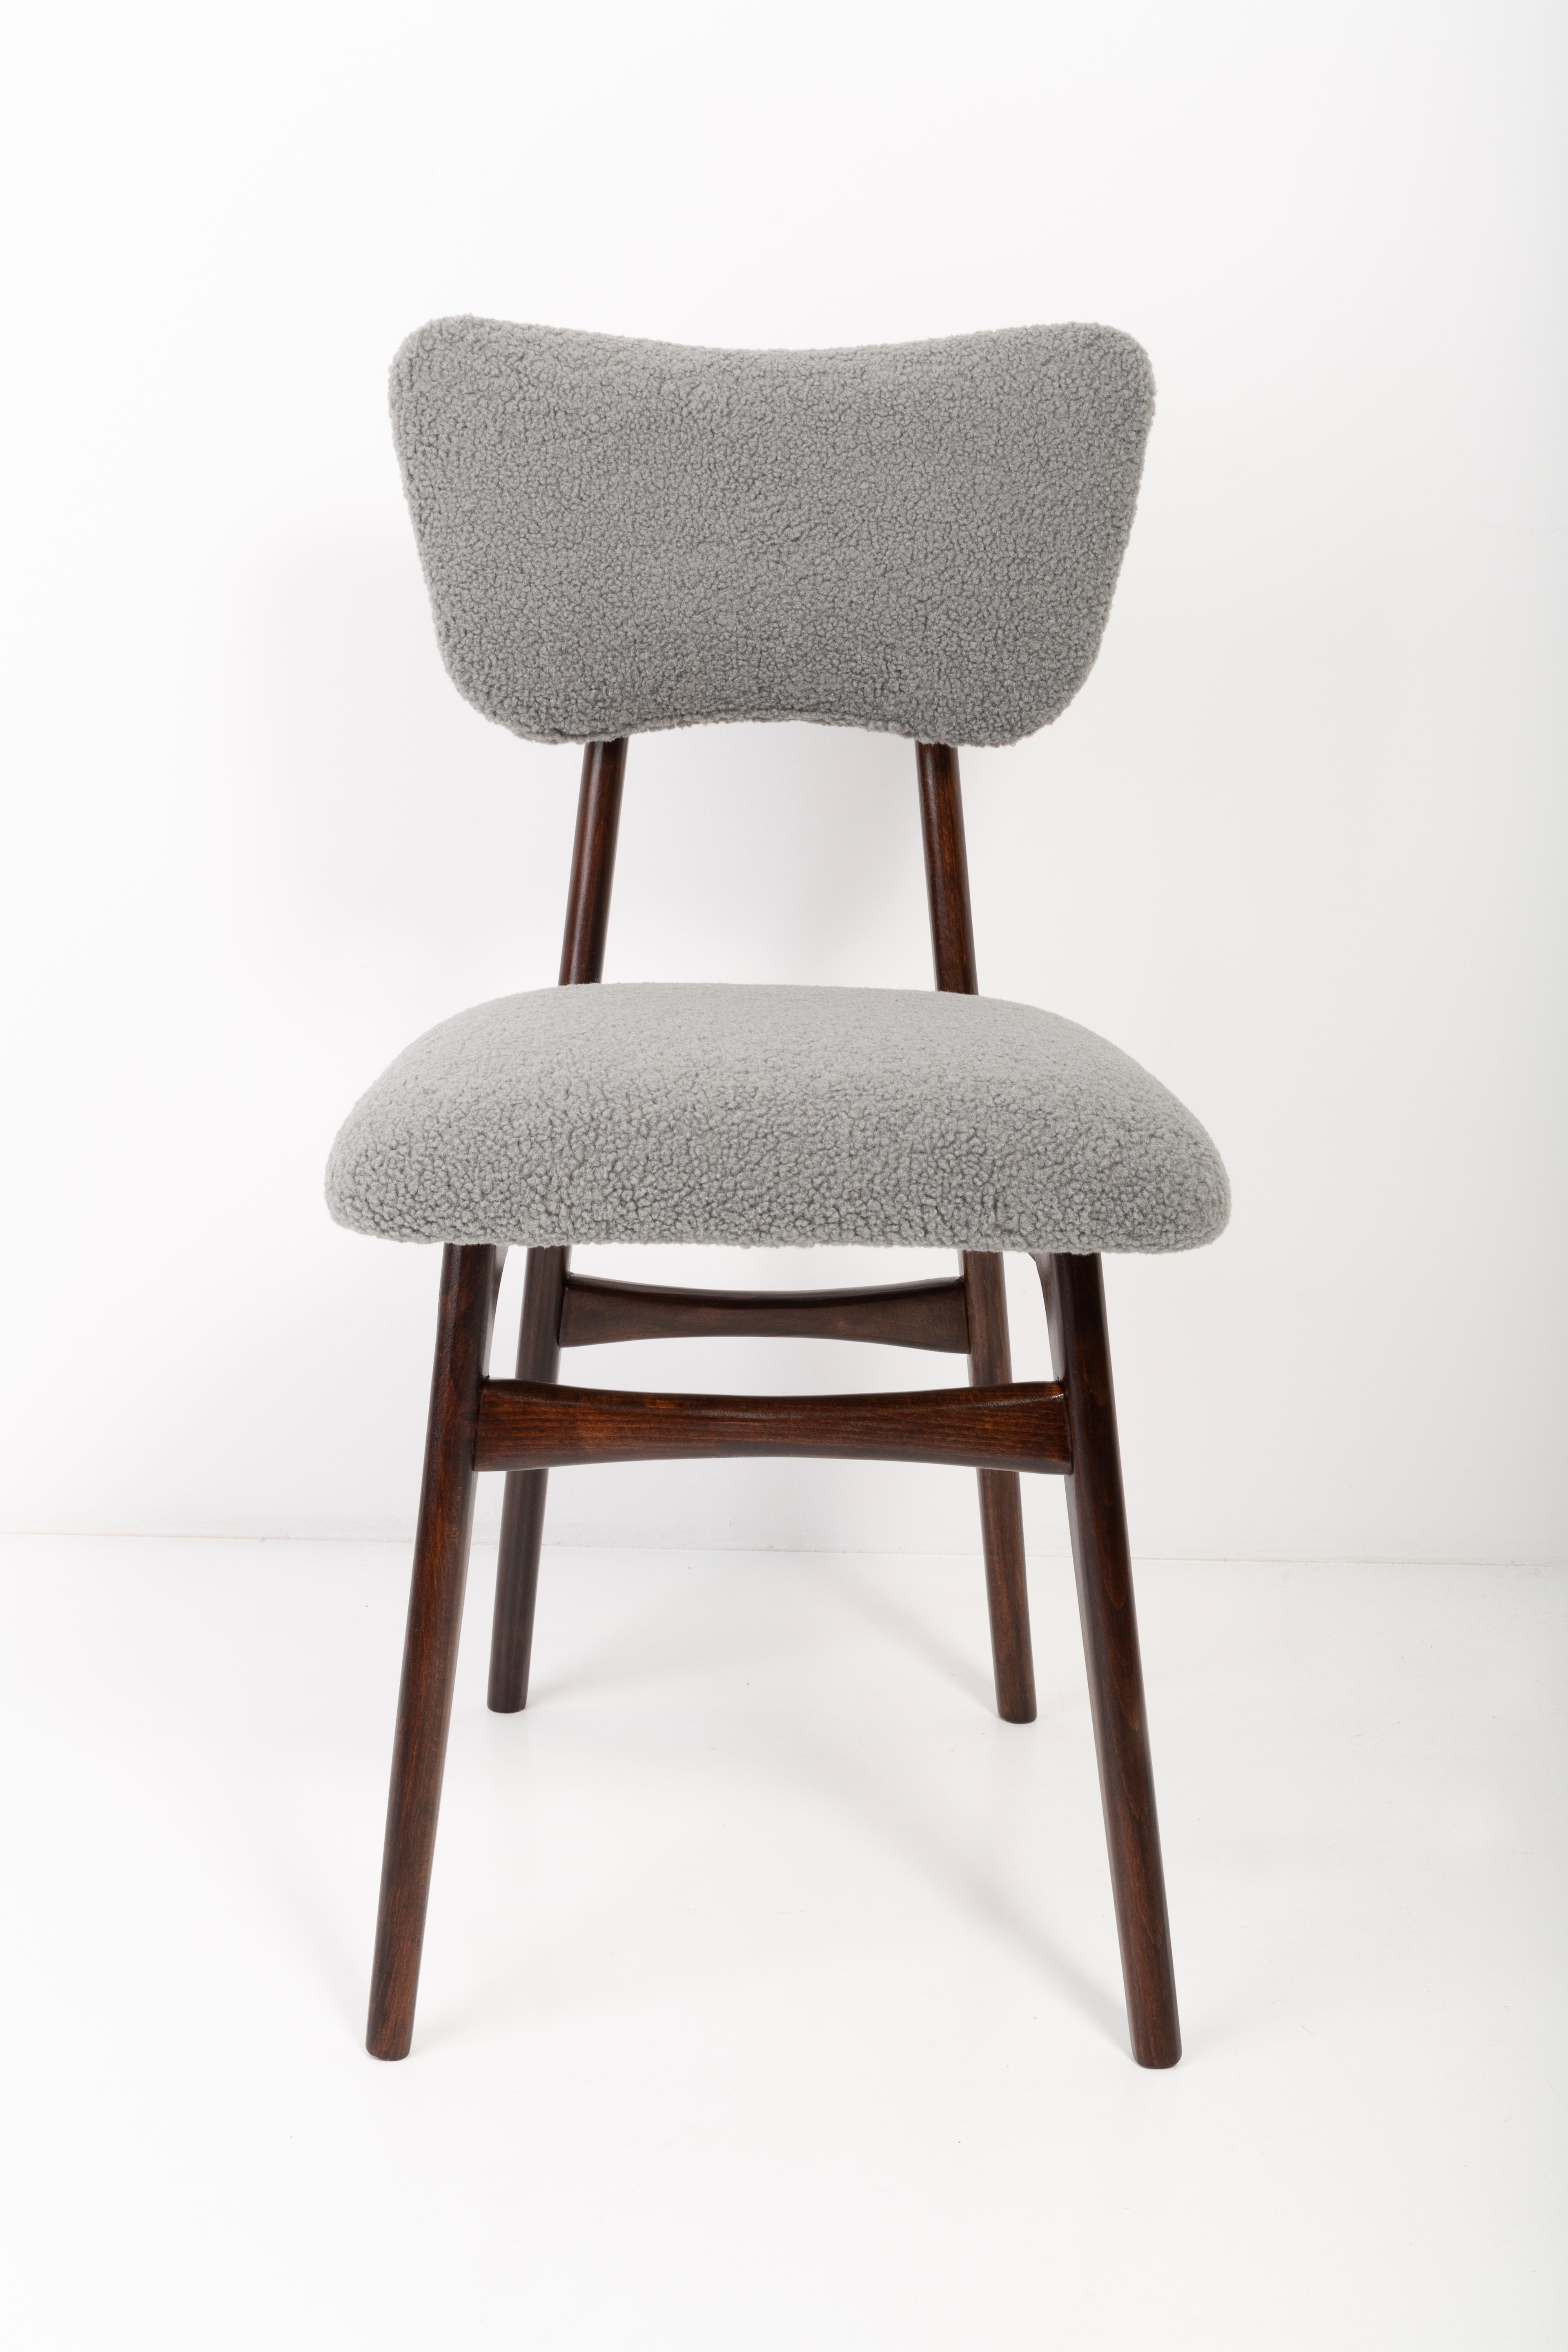 20th Century Gray Boucle Chair, 1960s For Sale 5